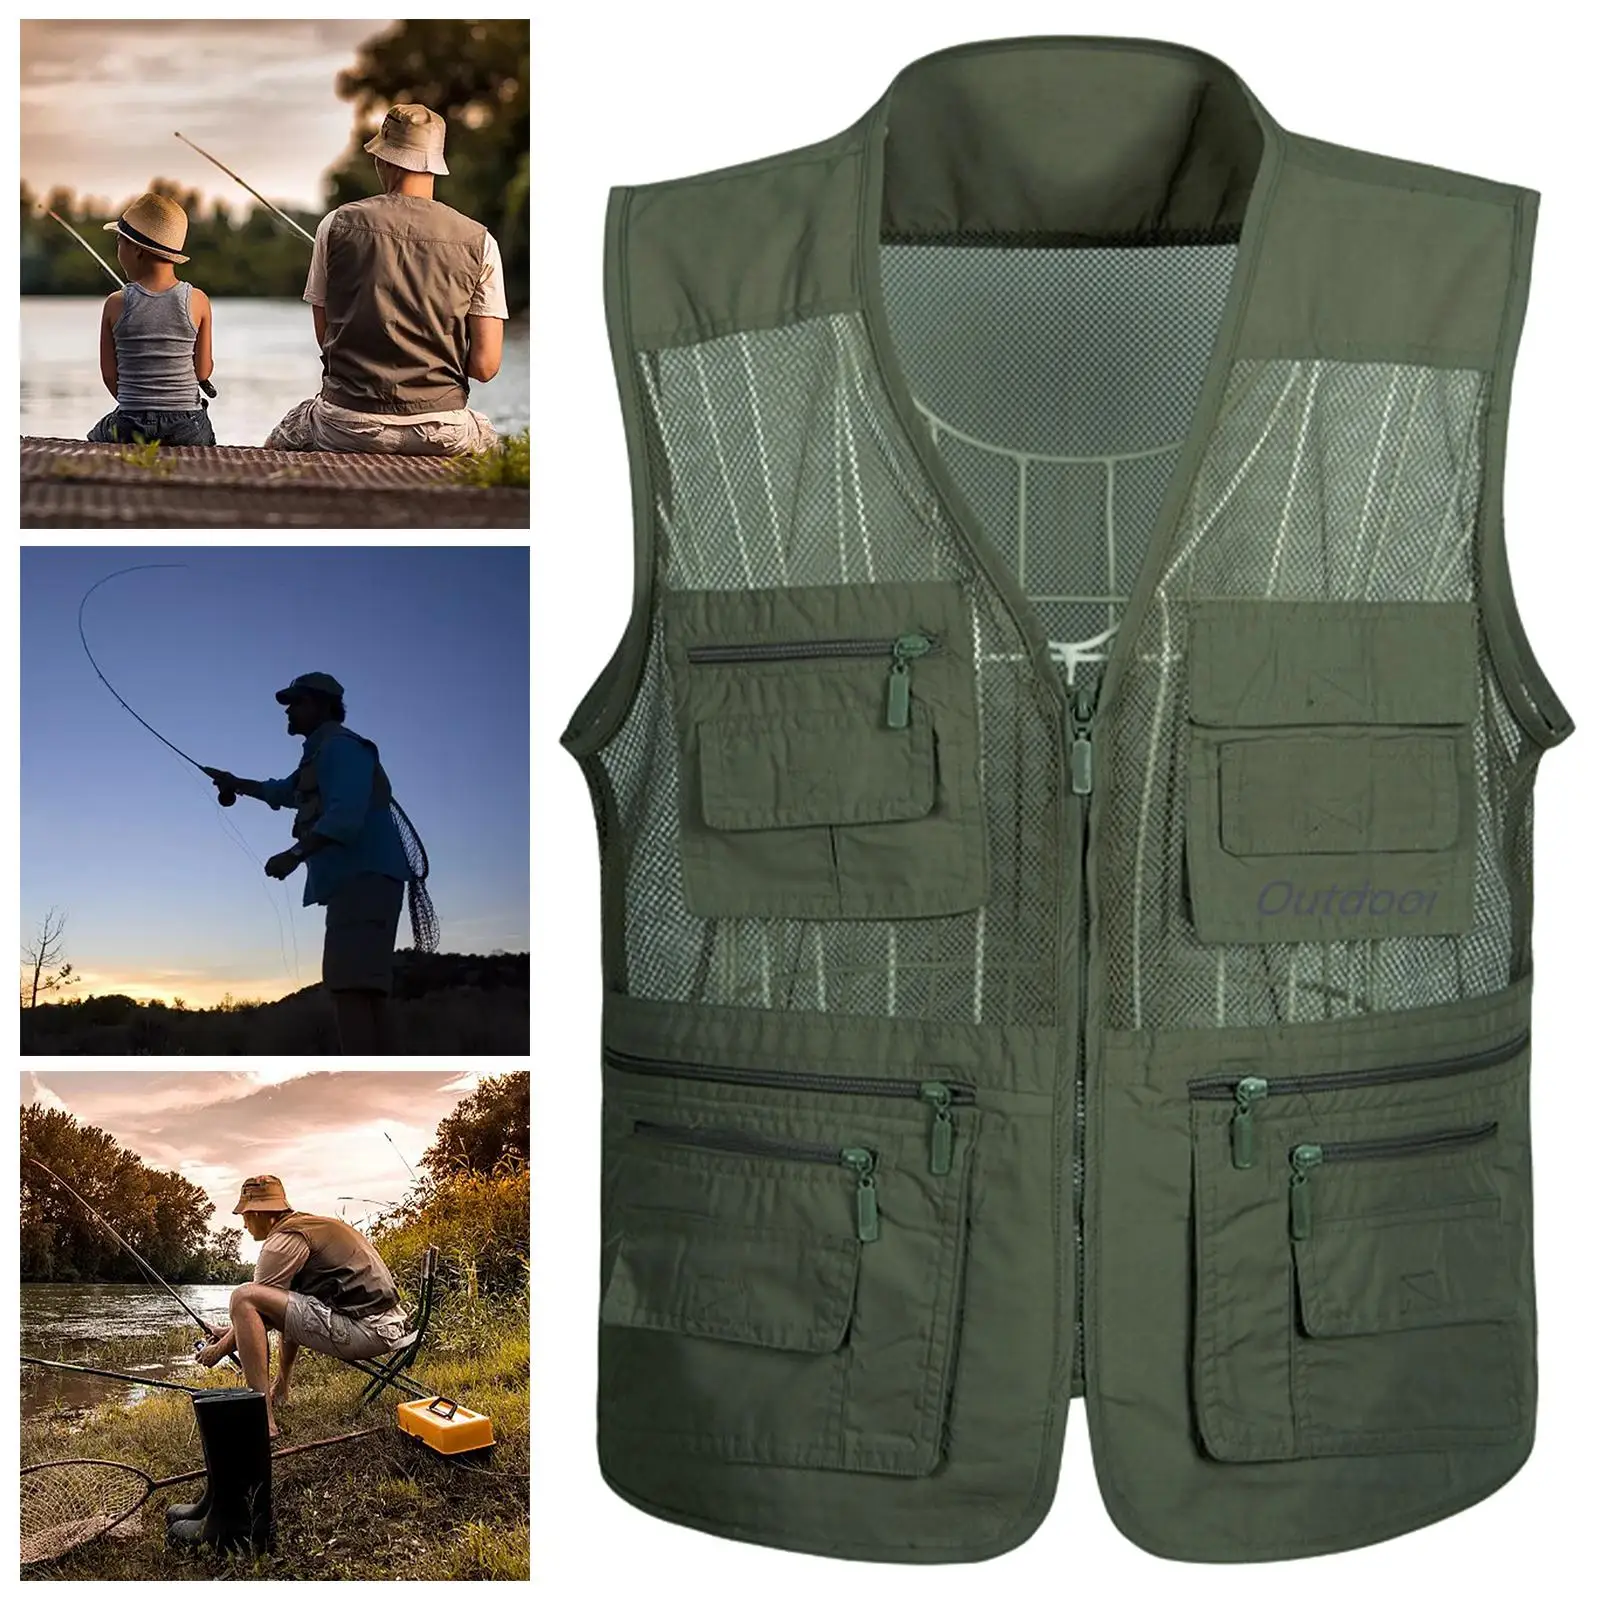 Outdoor Fishing Mesh Vest Breathable Fishing Jacket Utility Vest for Hiking